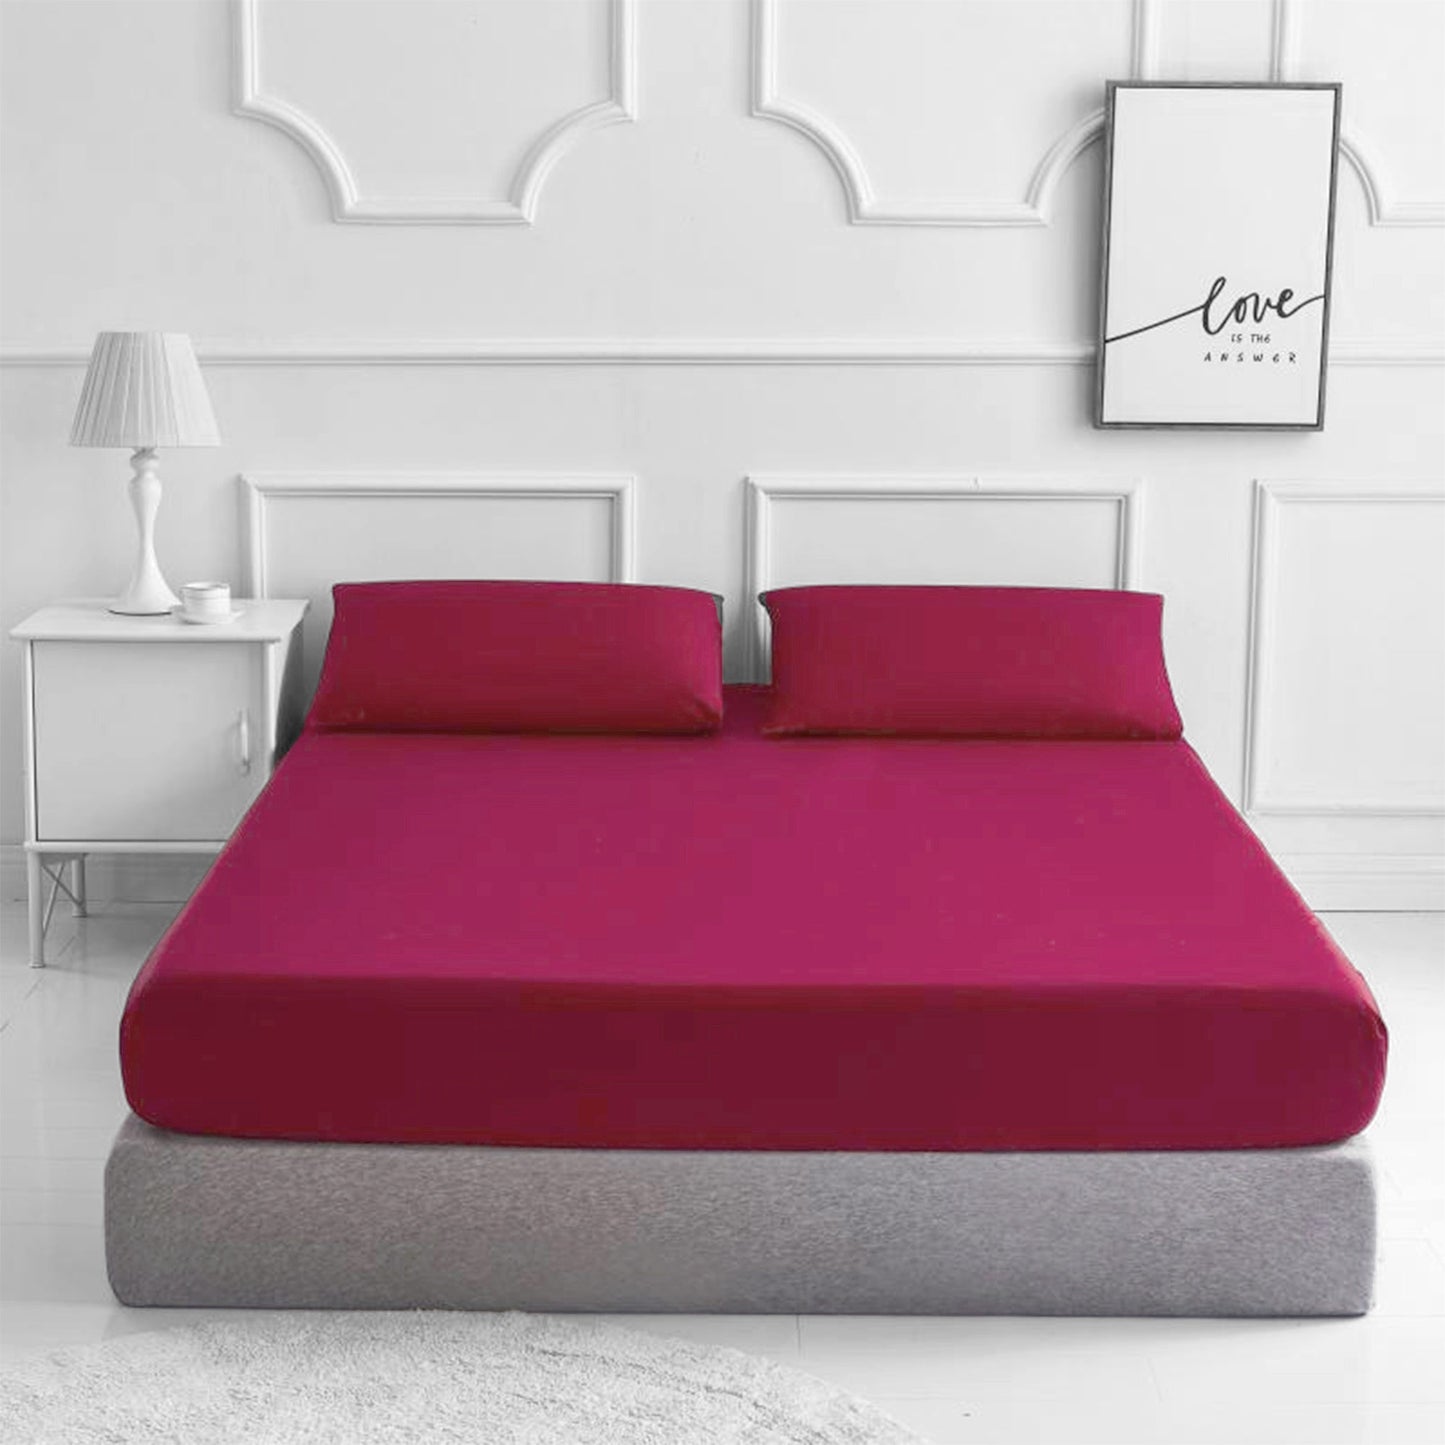 Fitted Bed Sheet Matching FREE 2 X PILLOW CASE Plain Dyed - TheComfortshop.co.ukBed Sheets0721718963707thecomfortshopTheComfortshop.co.ukPC FIT FREE PP Red KingRedKingFitted Bed Sheet Matching FREE 2 X PILLOW CASE Plain Dyed - TheComfortshop.co.uk